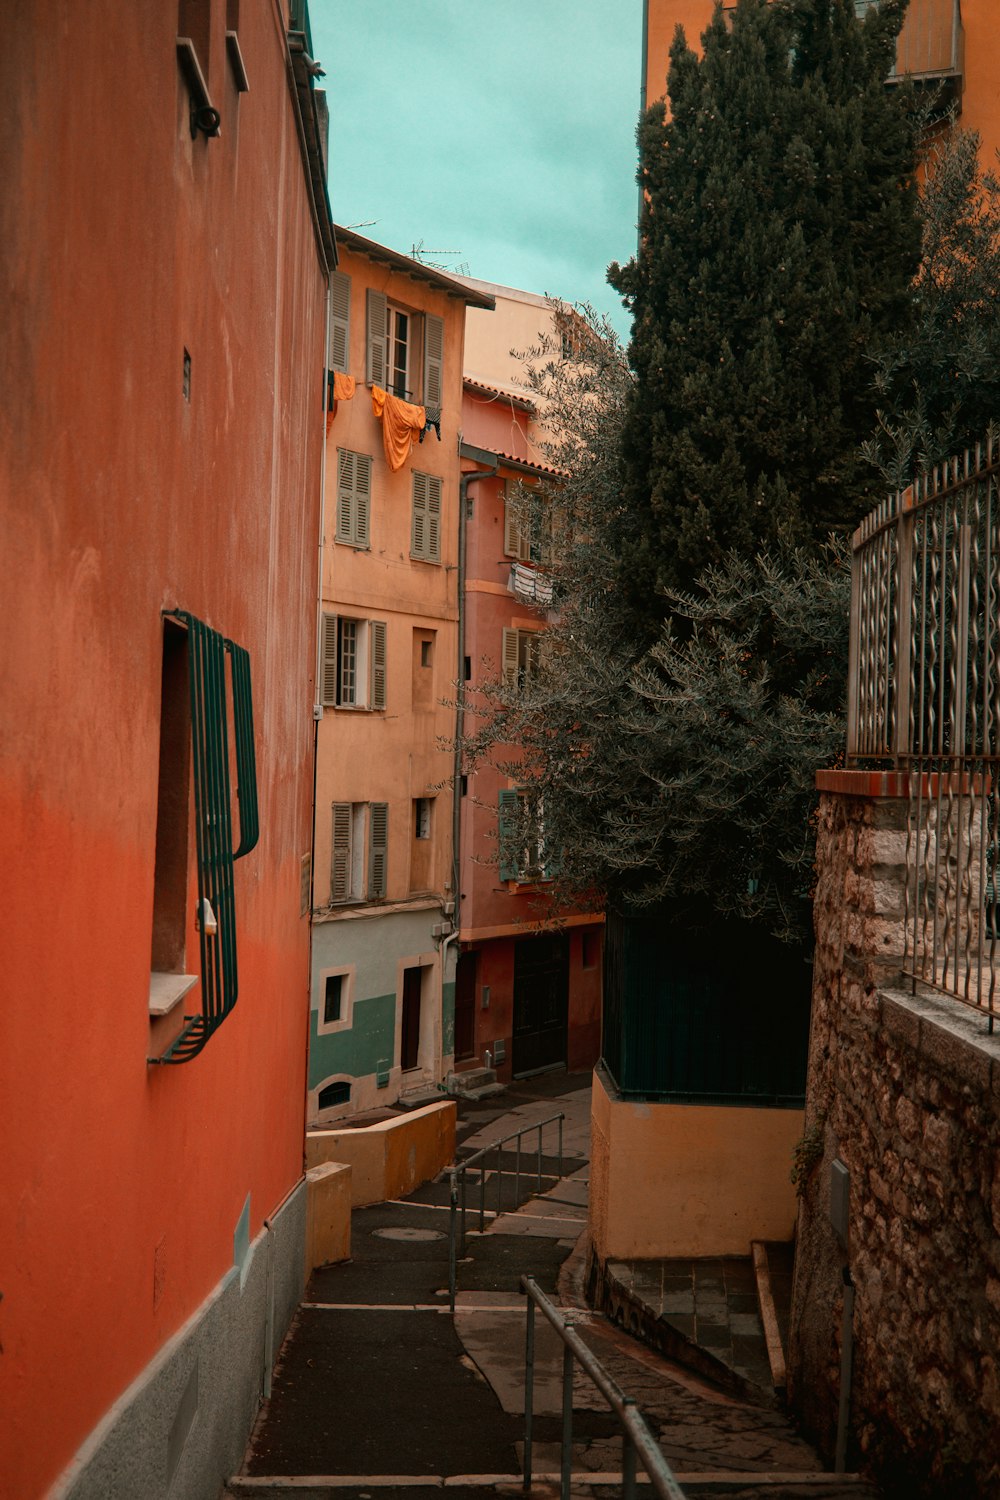 a narrow alley way with buildings and trees in the background